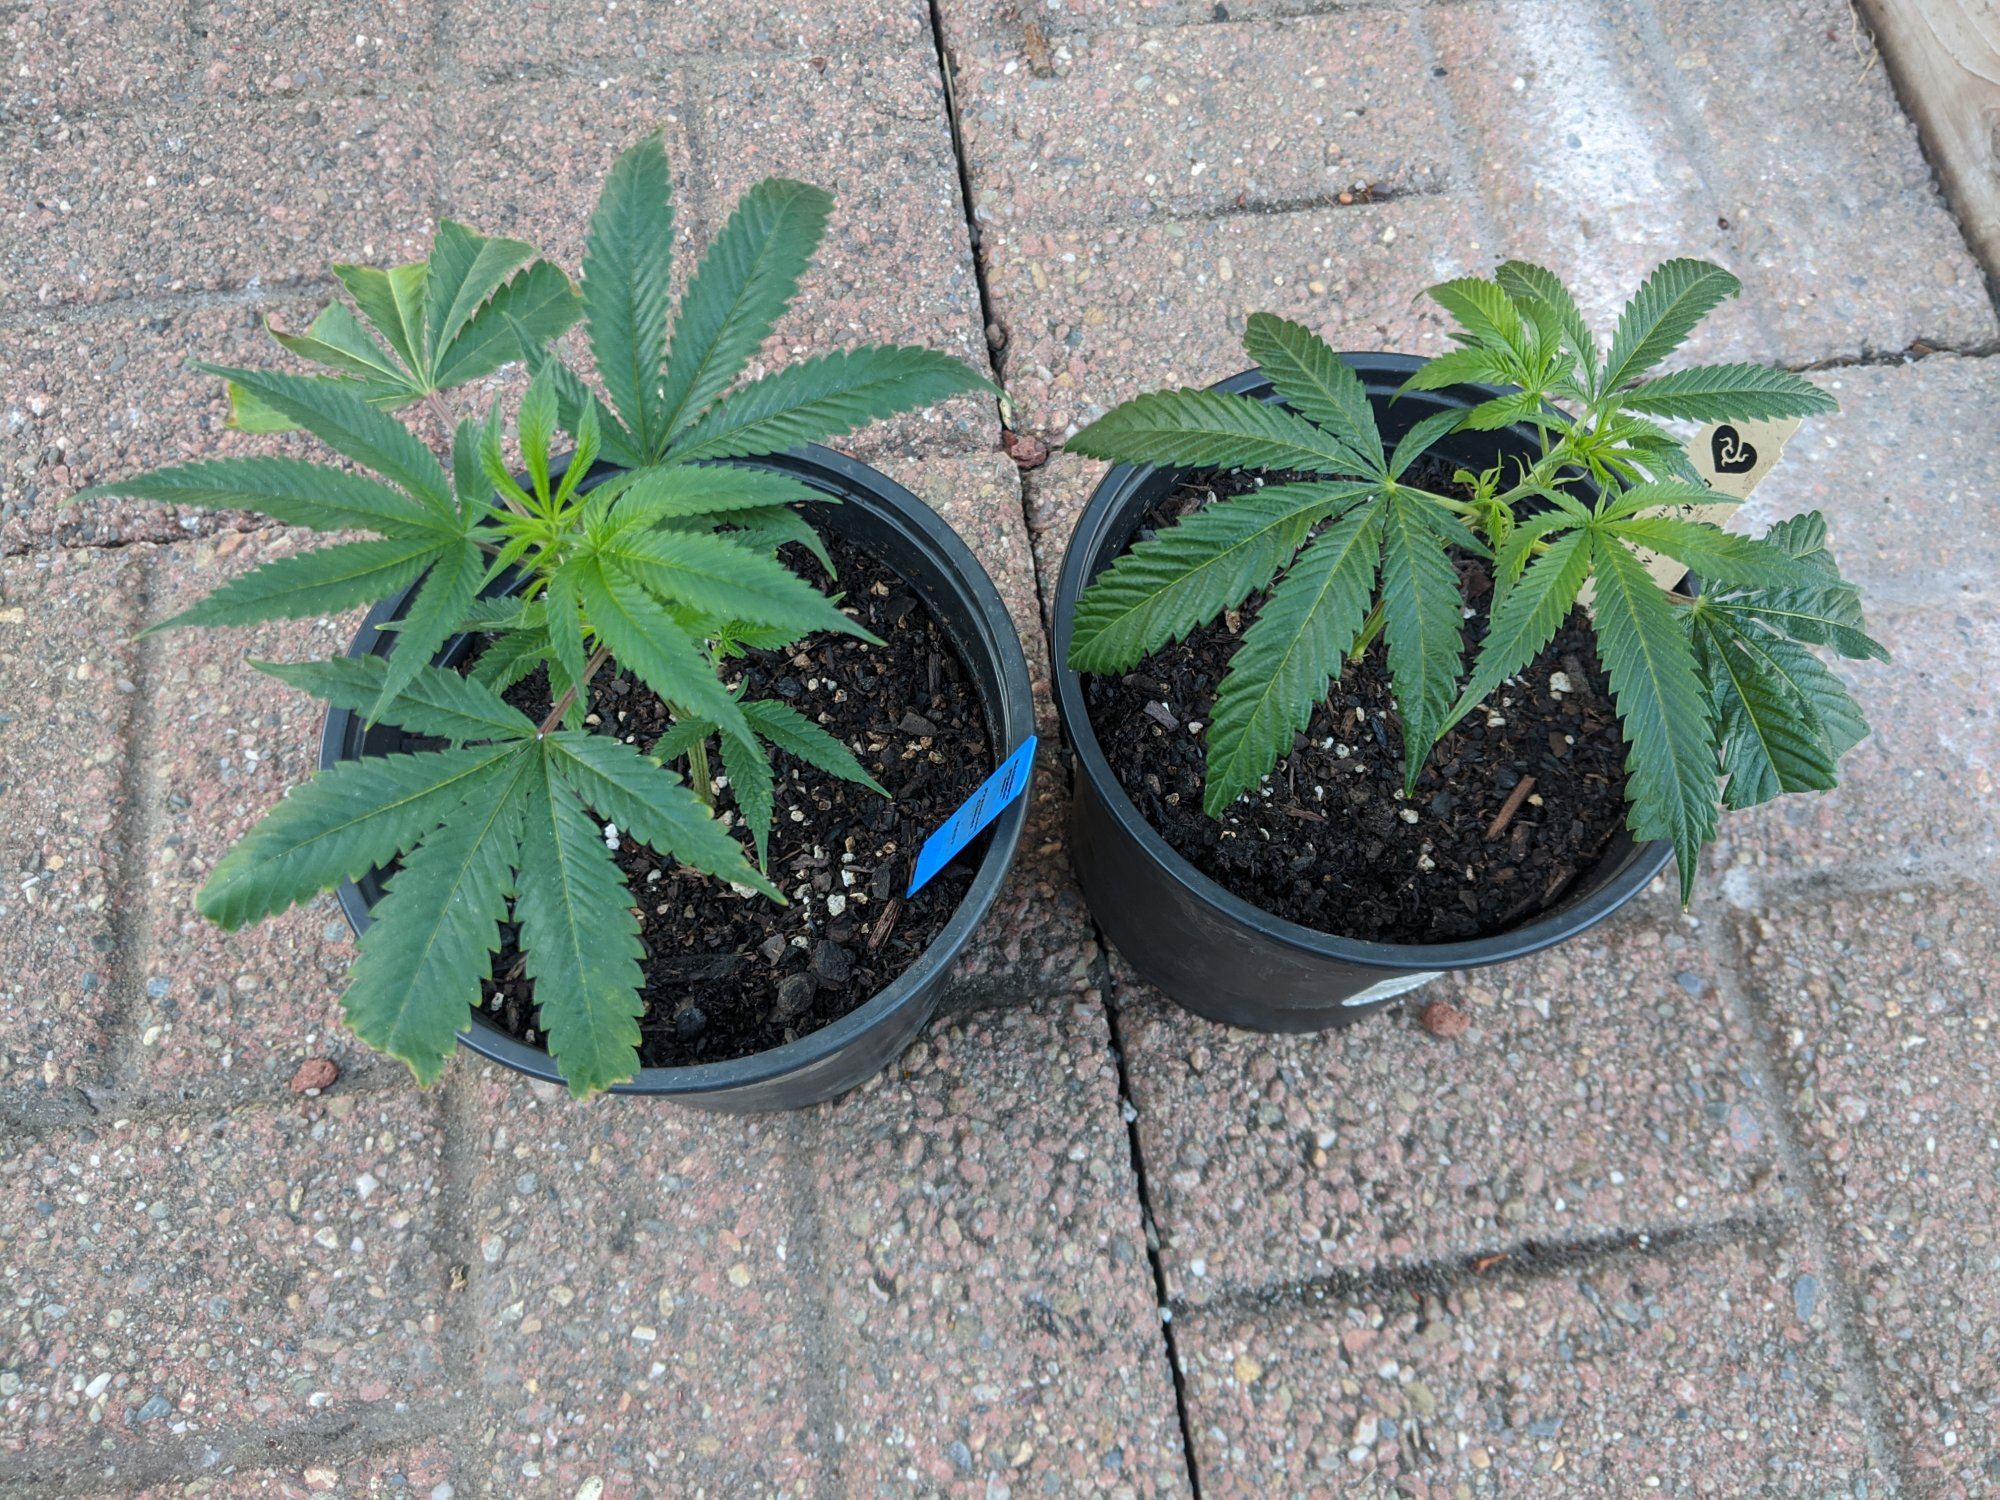 Do these clones seem healthy 2